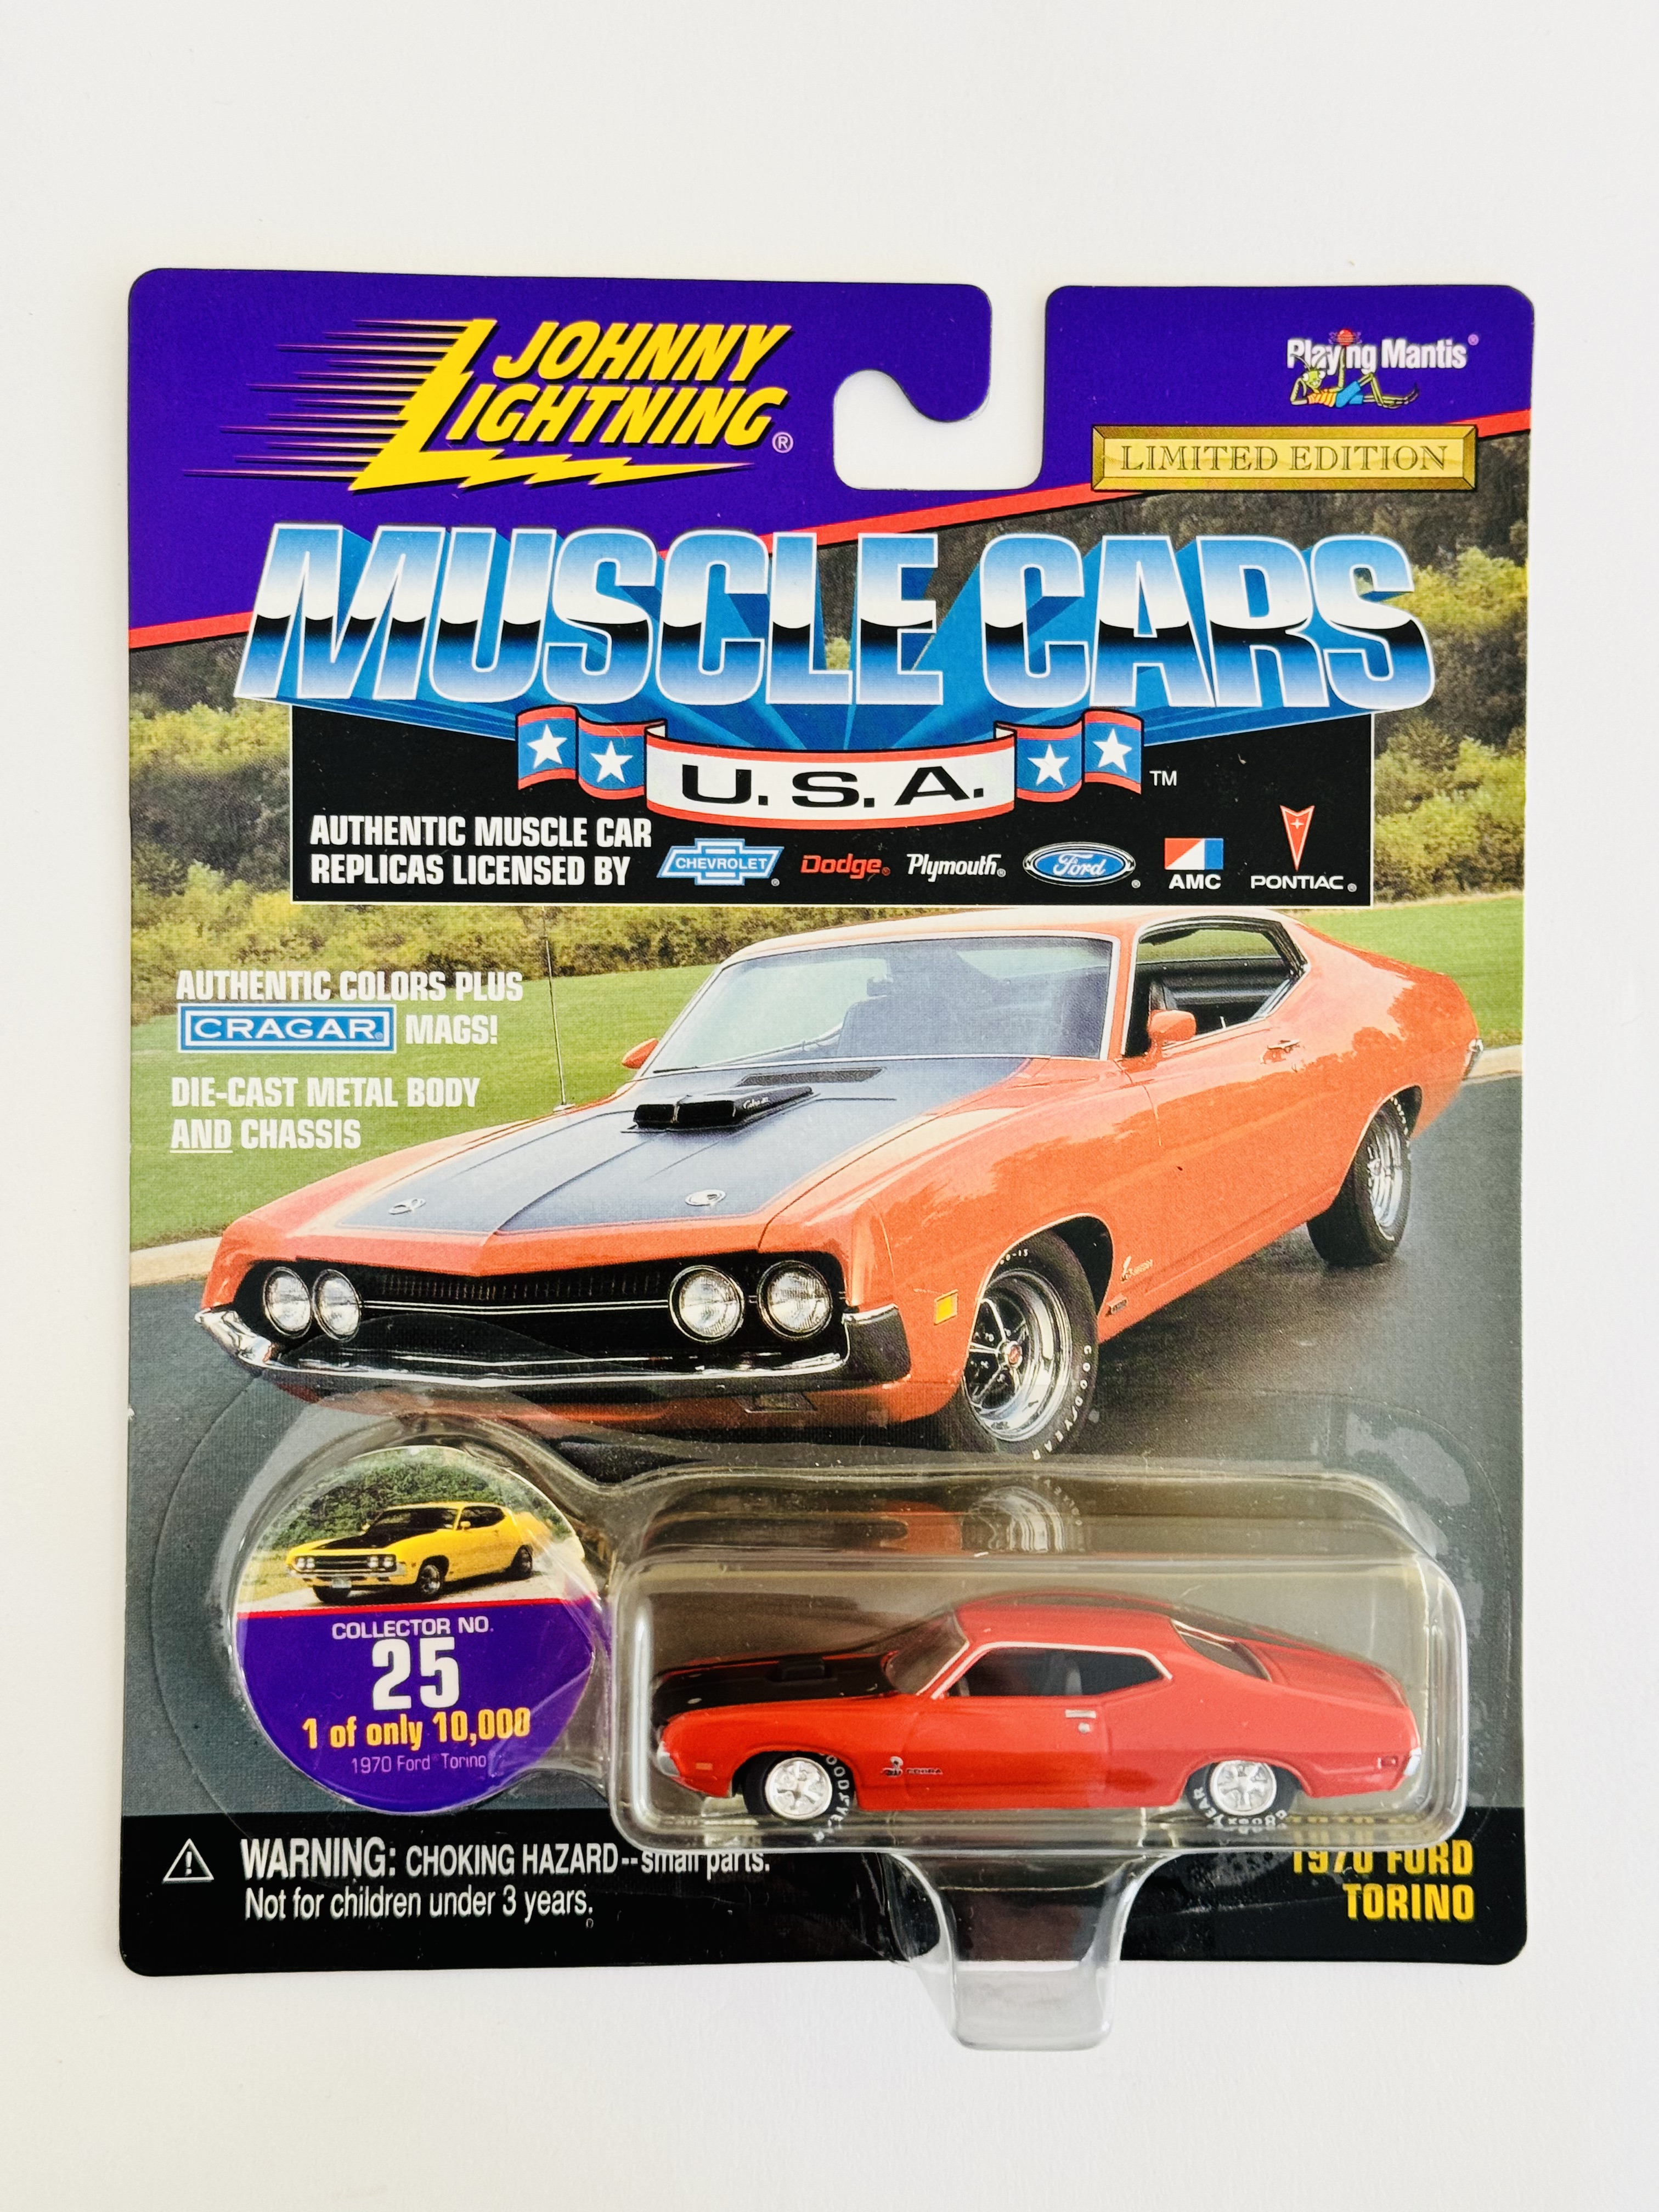 Johnny Lightning Muscle Cars U.S.A. 1970 Ford Torino